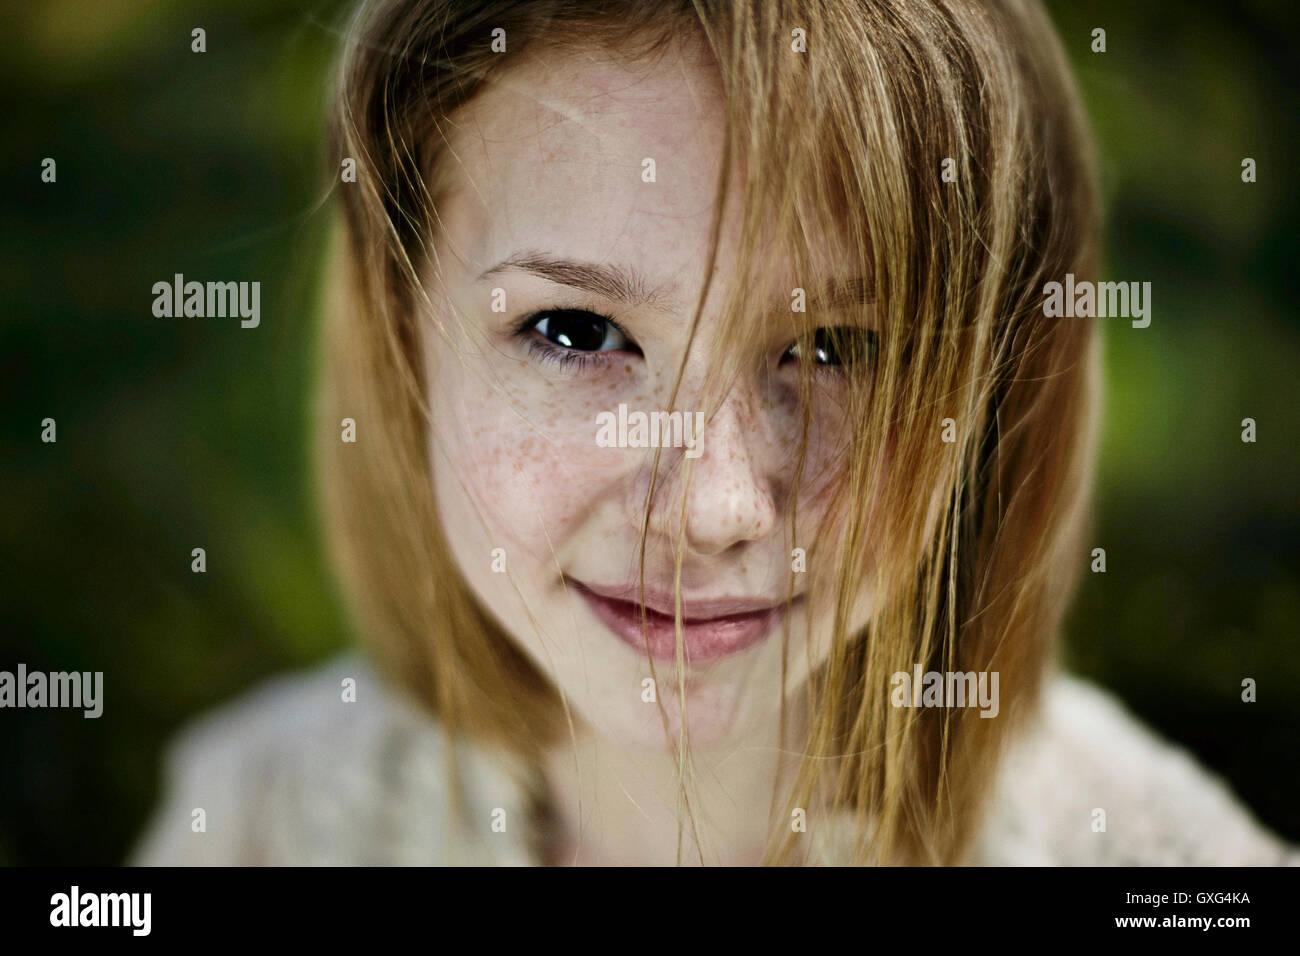 Smiling Caucasian girl with freckles Banque D'Images